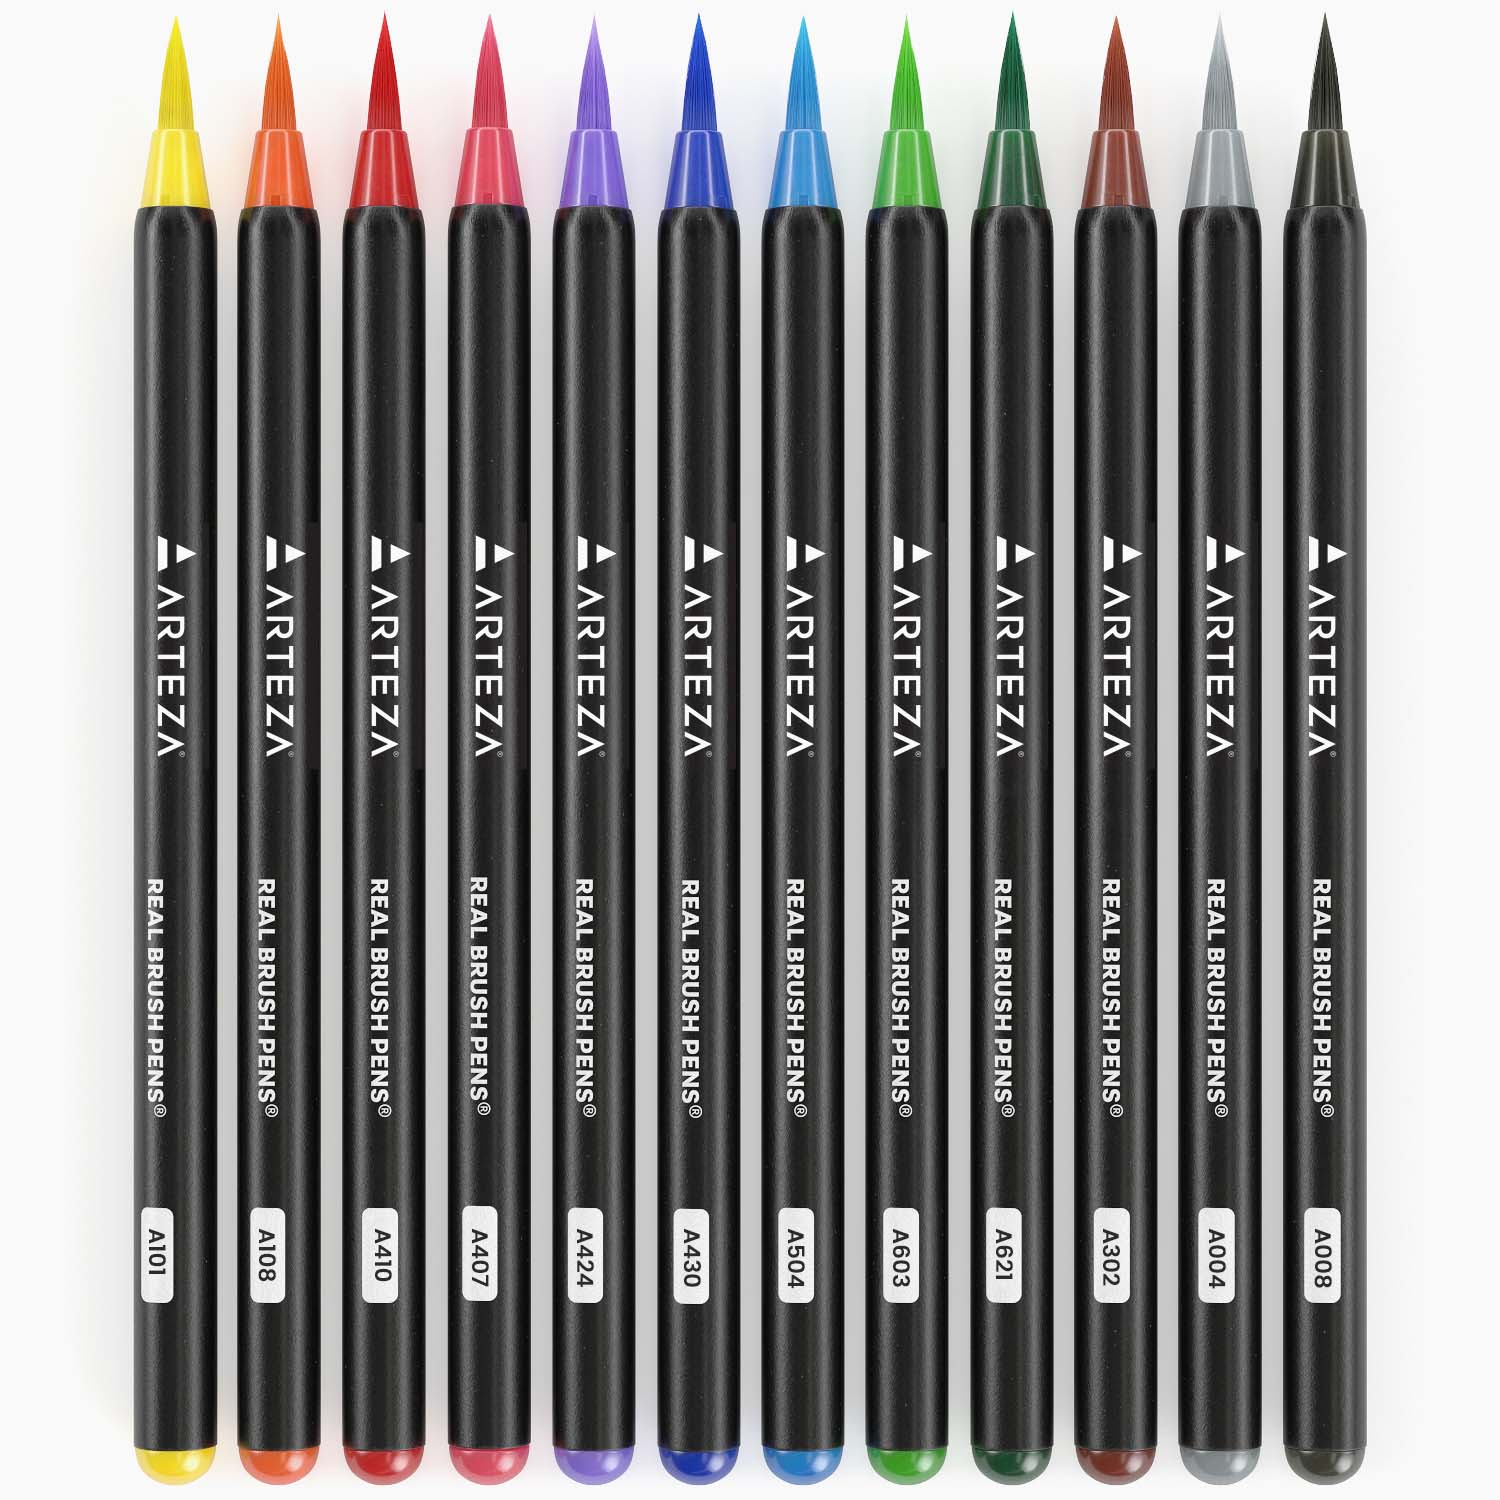  ARTEZA Real Brush Pens, 12 Pack, Drawing Markers with Flexible  Brush Tips, Watercolor Markers for Calligraphy, Painting & Coloring, Ideal  Art Supplies for Artists & Hobbyists